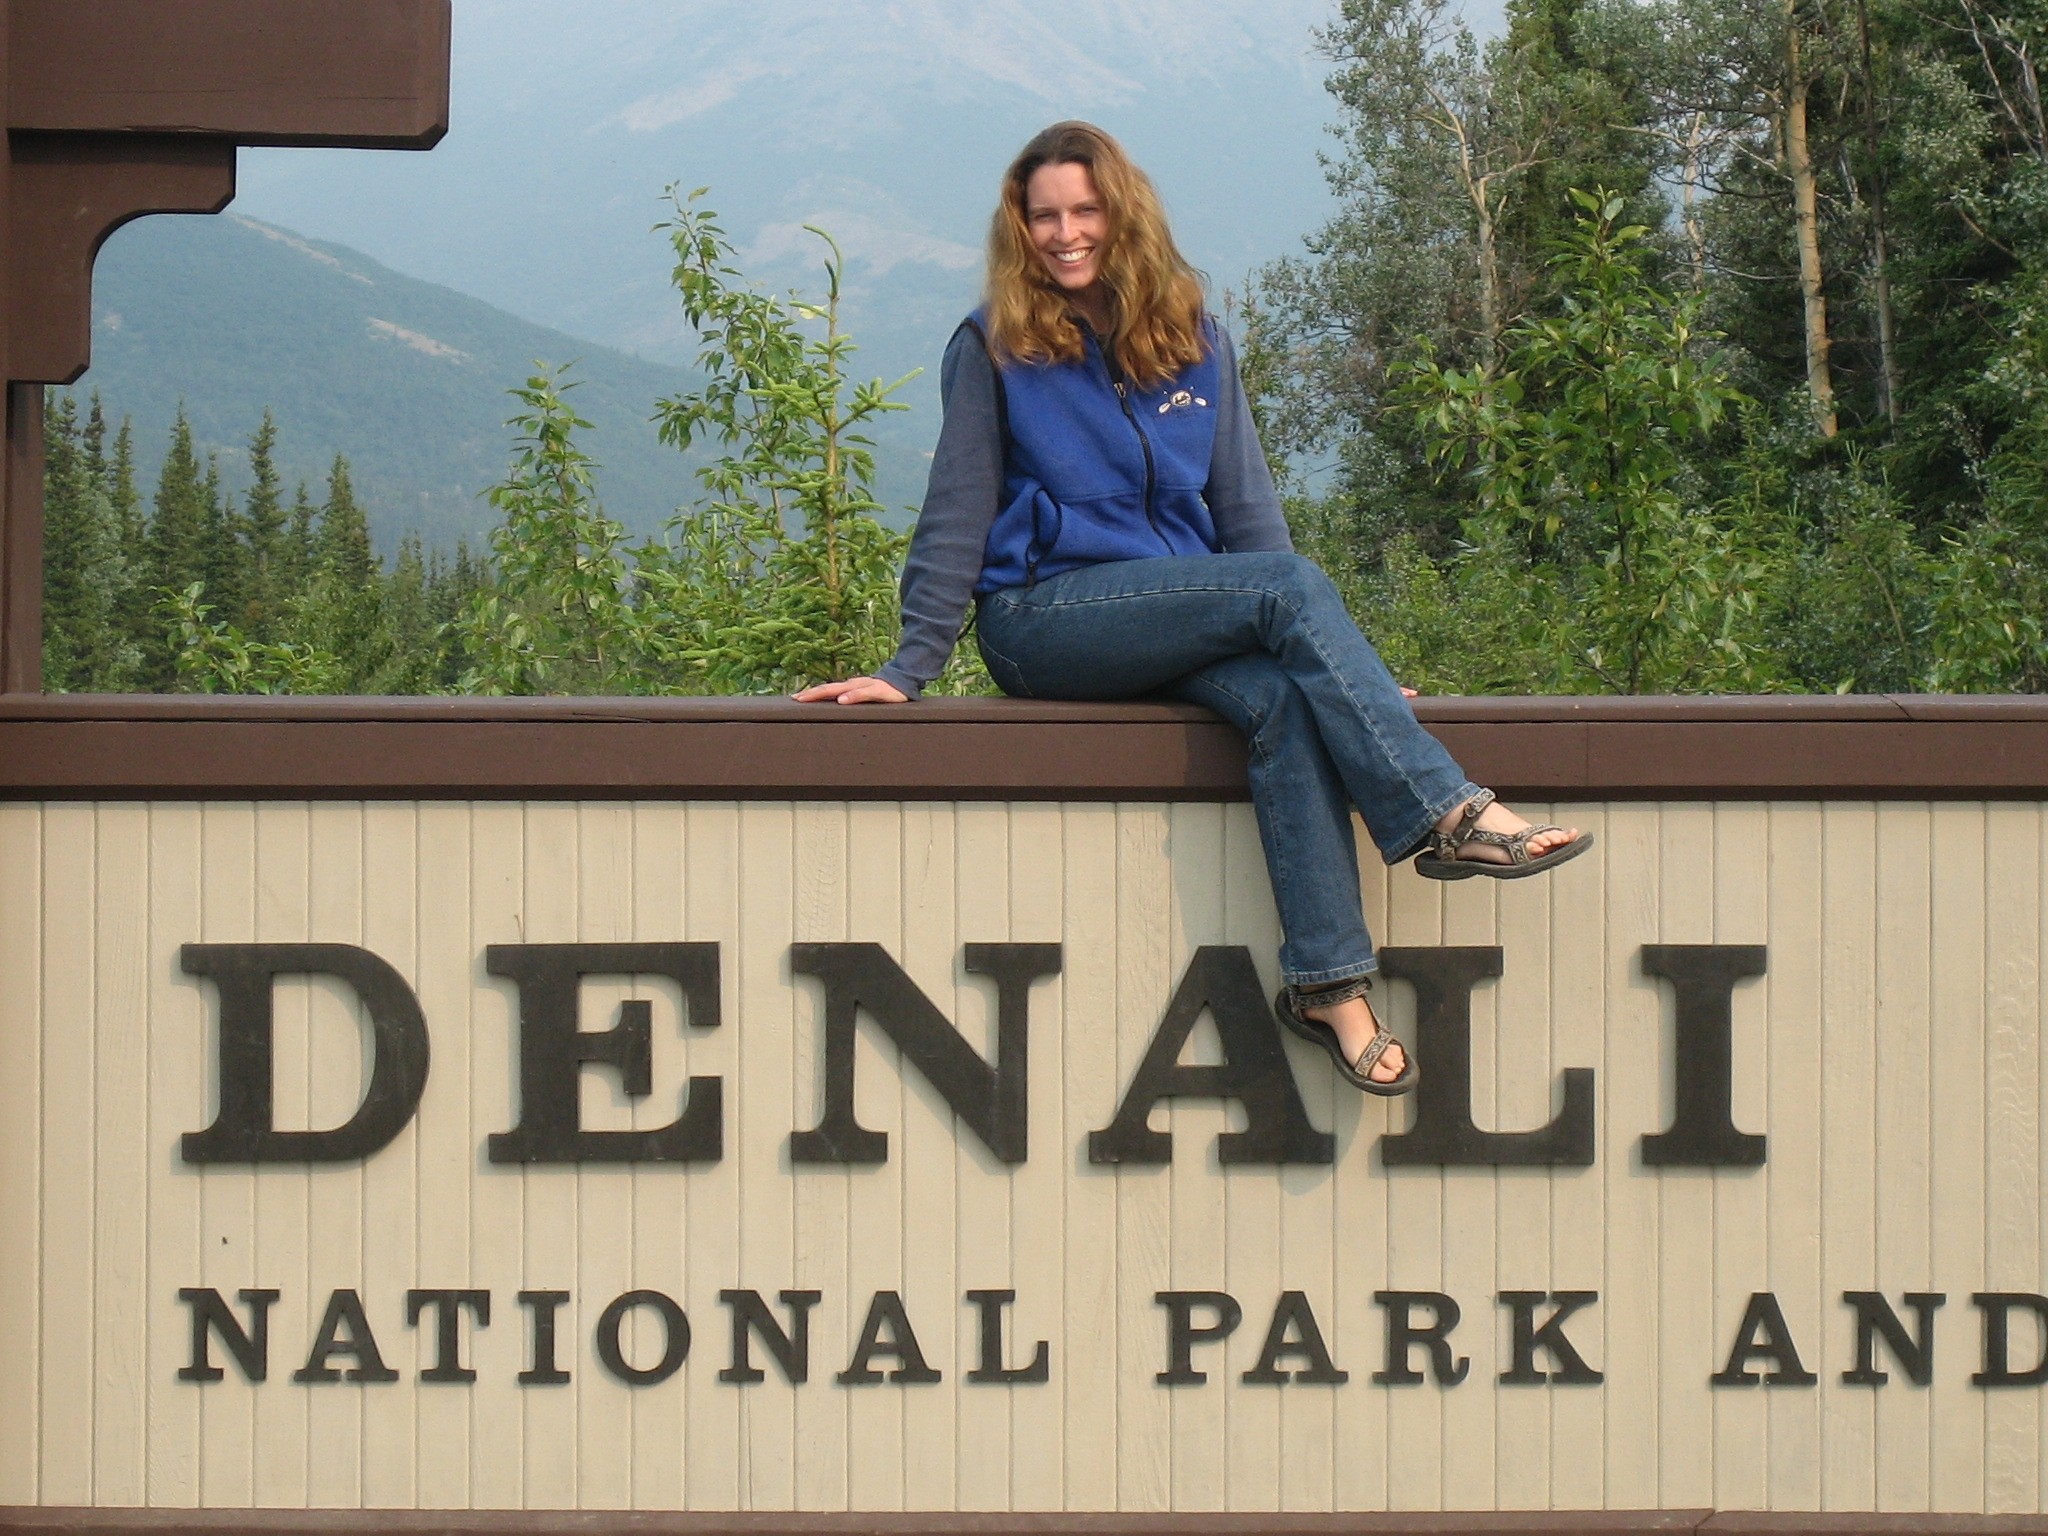 Road Trip to Denali National Park and Other Adventures - Epicurean Expats